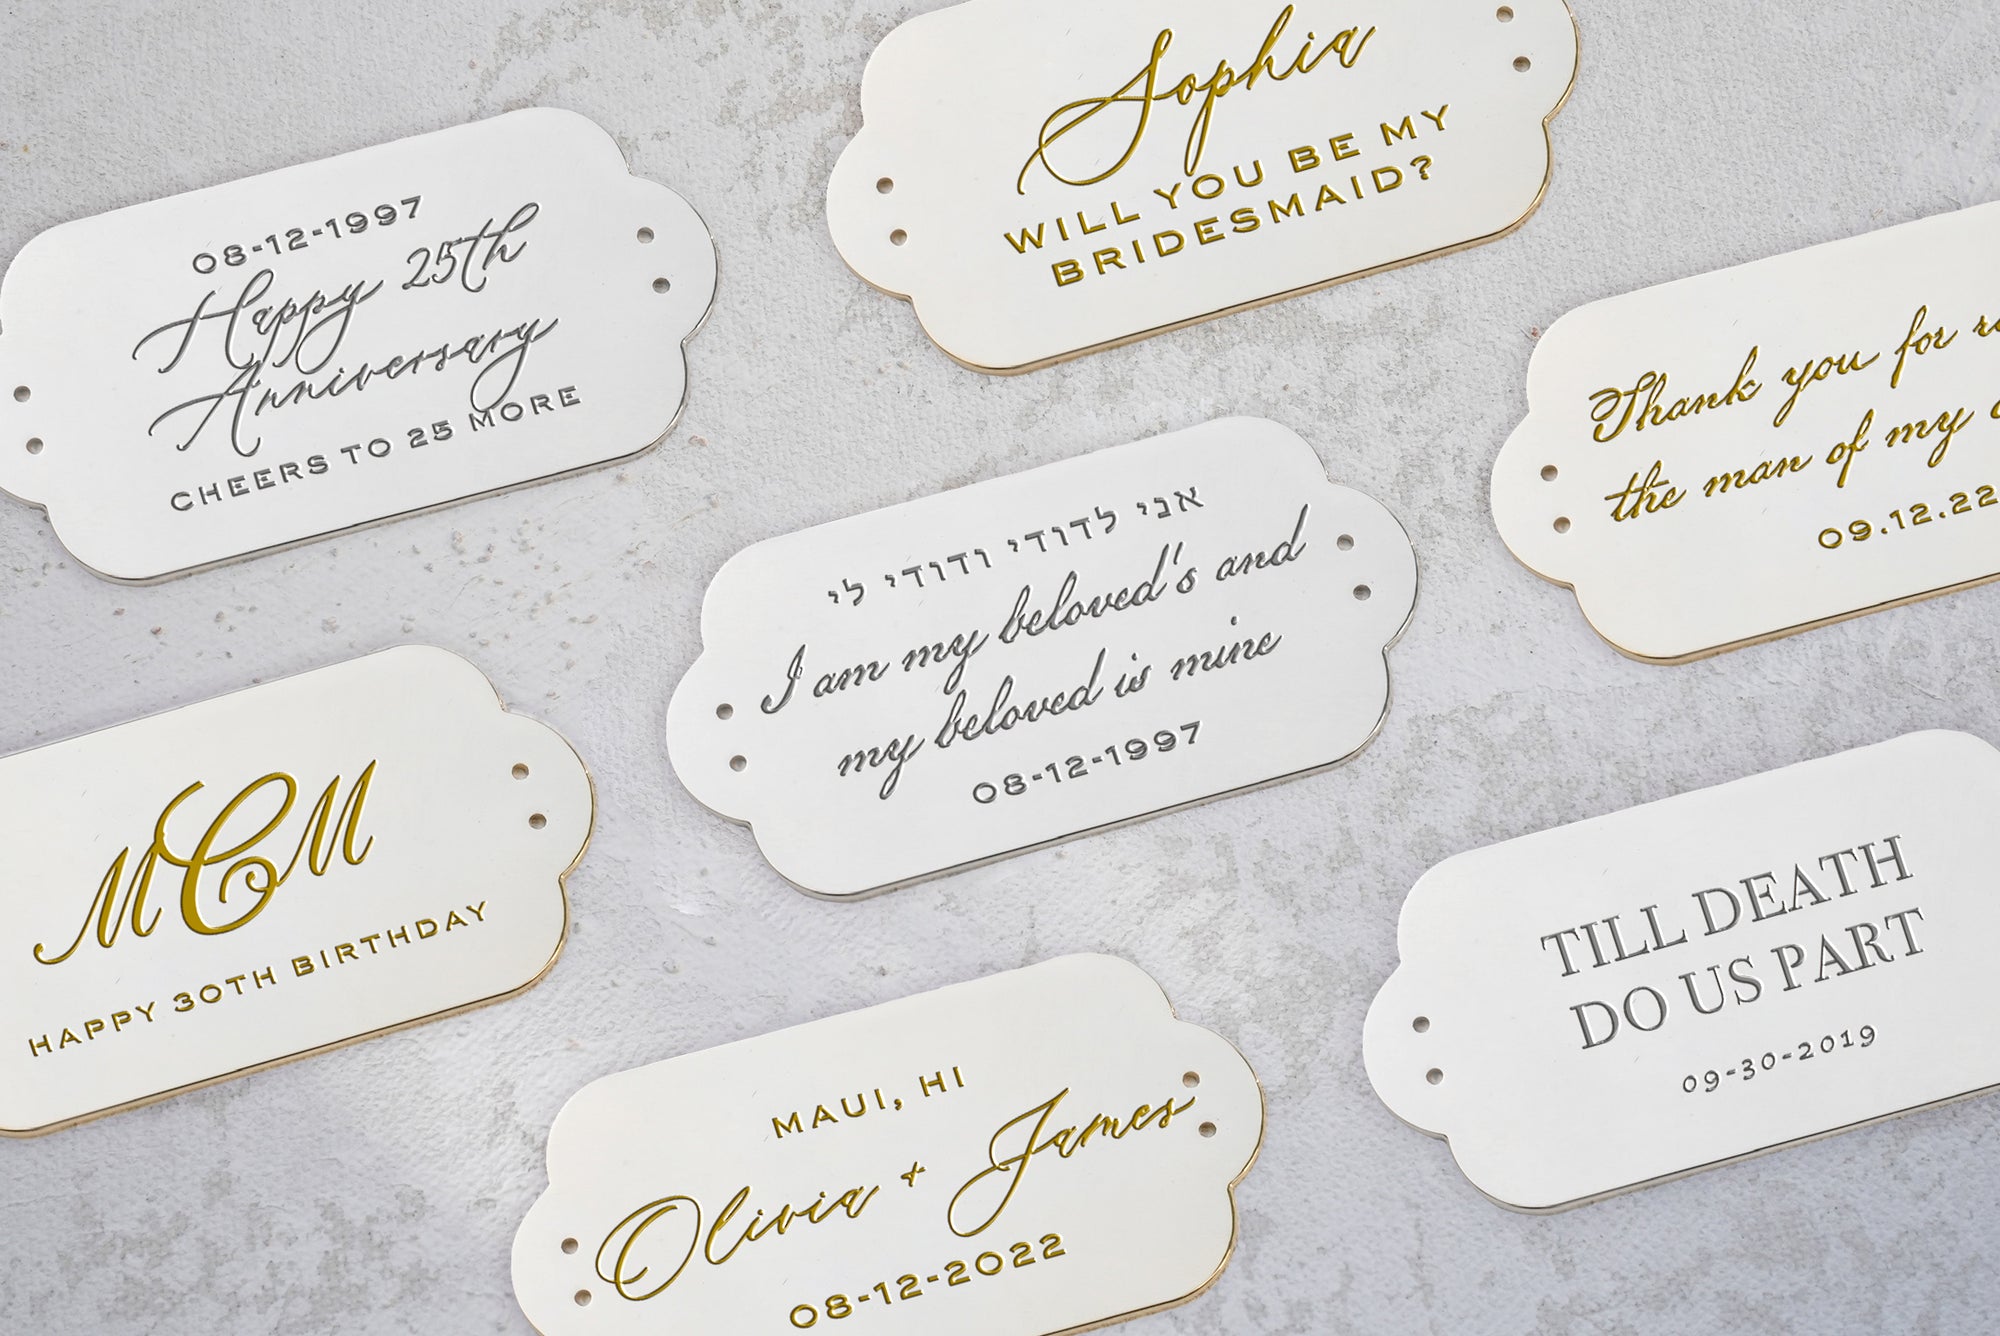 An assortment of elegant, personalized calligraphy cards for various occasions, featuring gold lettering on a Bella Clutch Limoncello Yellow Petite background from The Bella Rosa Collection.